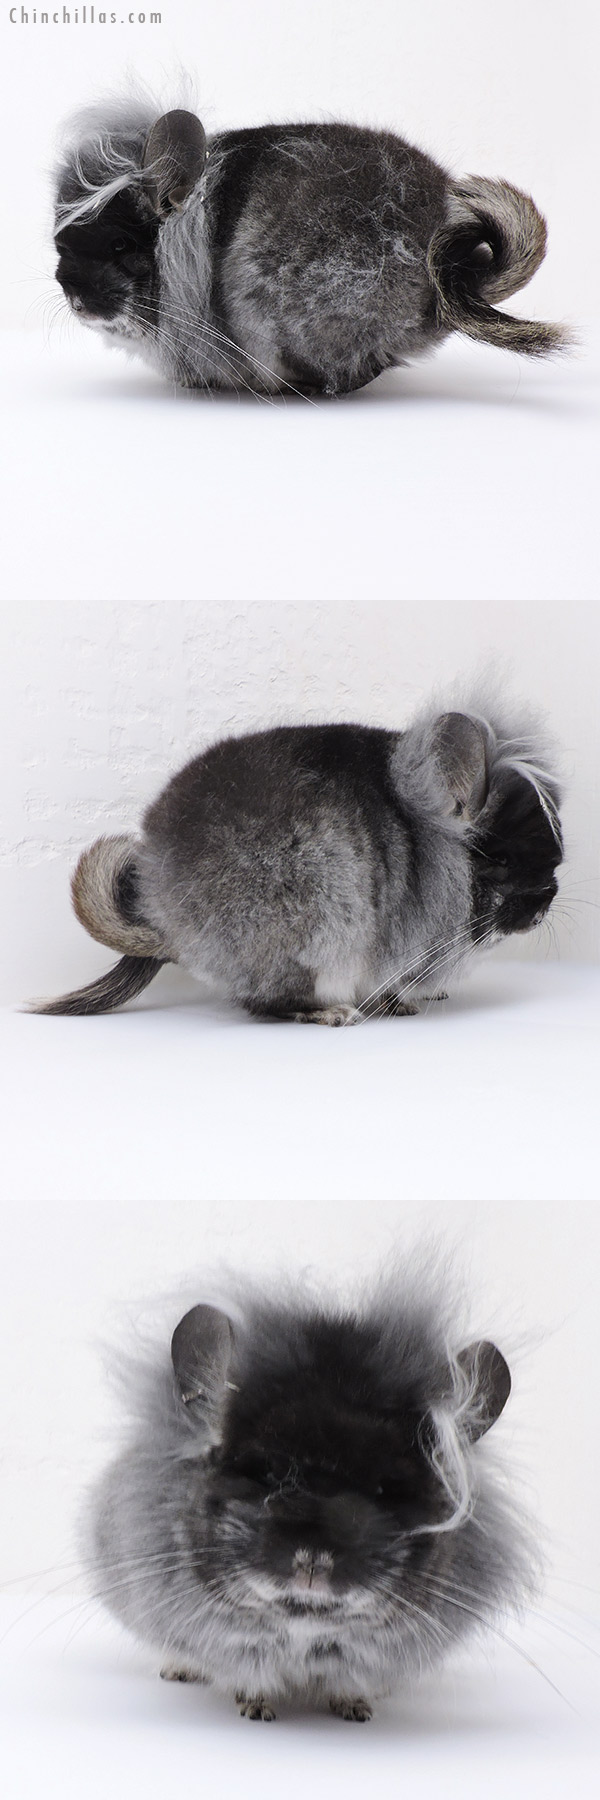 Chinchilla or related item offered for sale or export on Chinchillas.com - 19016 Exceptional Black Velvet G2  Royal Persian Angora Male Chinchilla with Lion Mane